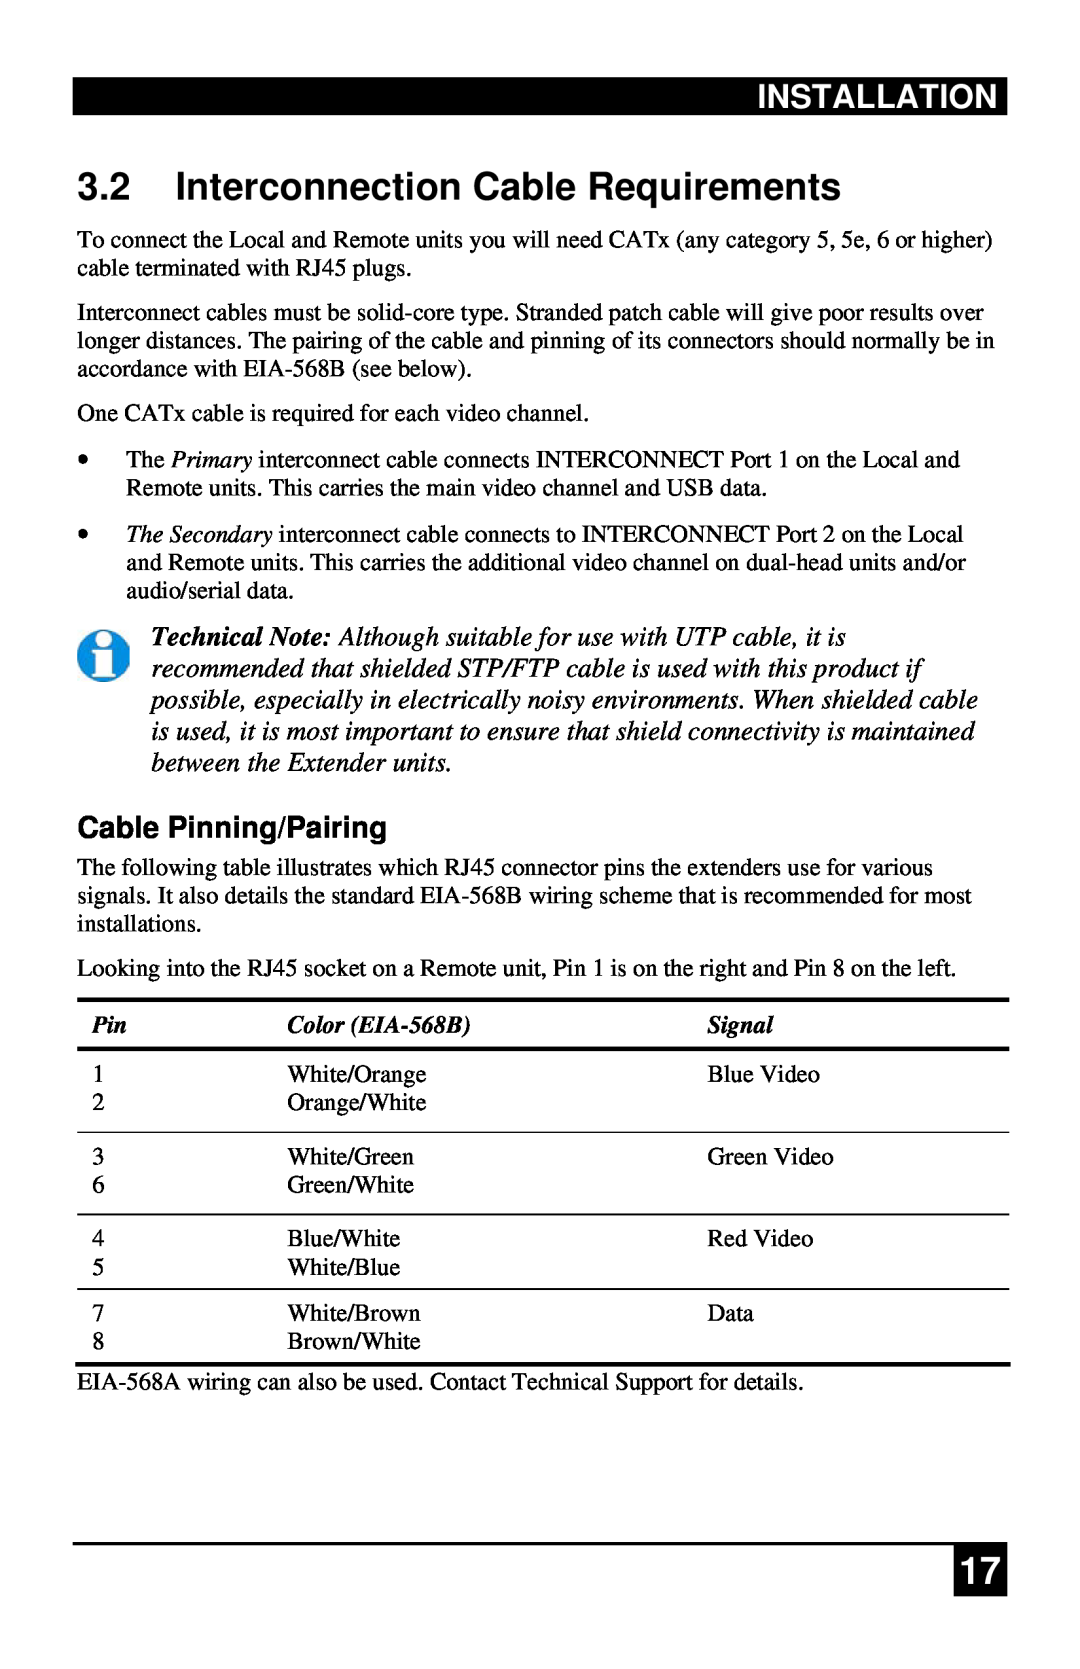 Black Box ACU4222A 3.2Interconnection Cable Requirements, Installation, Cable Pinning/Pairing, Color EIA-568B, Signal 